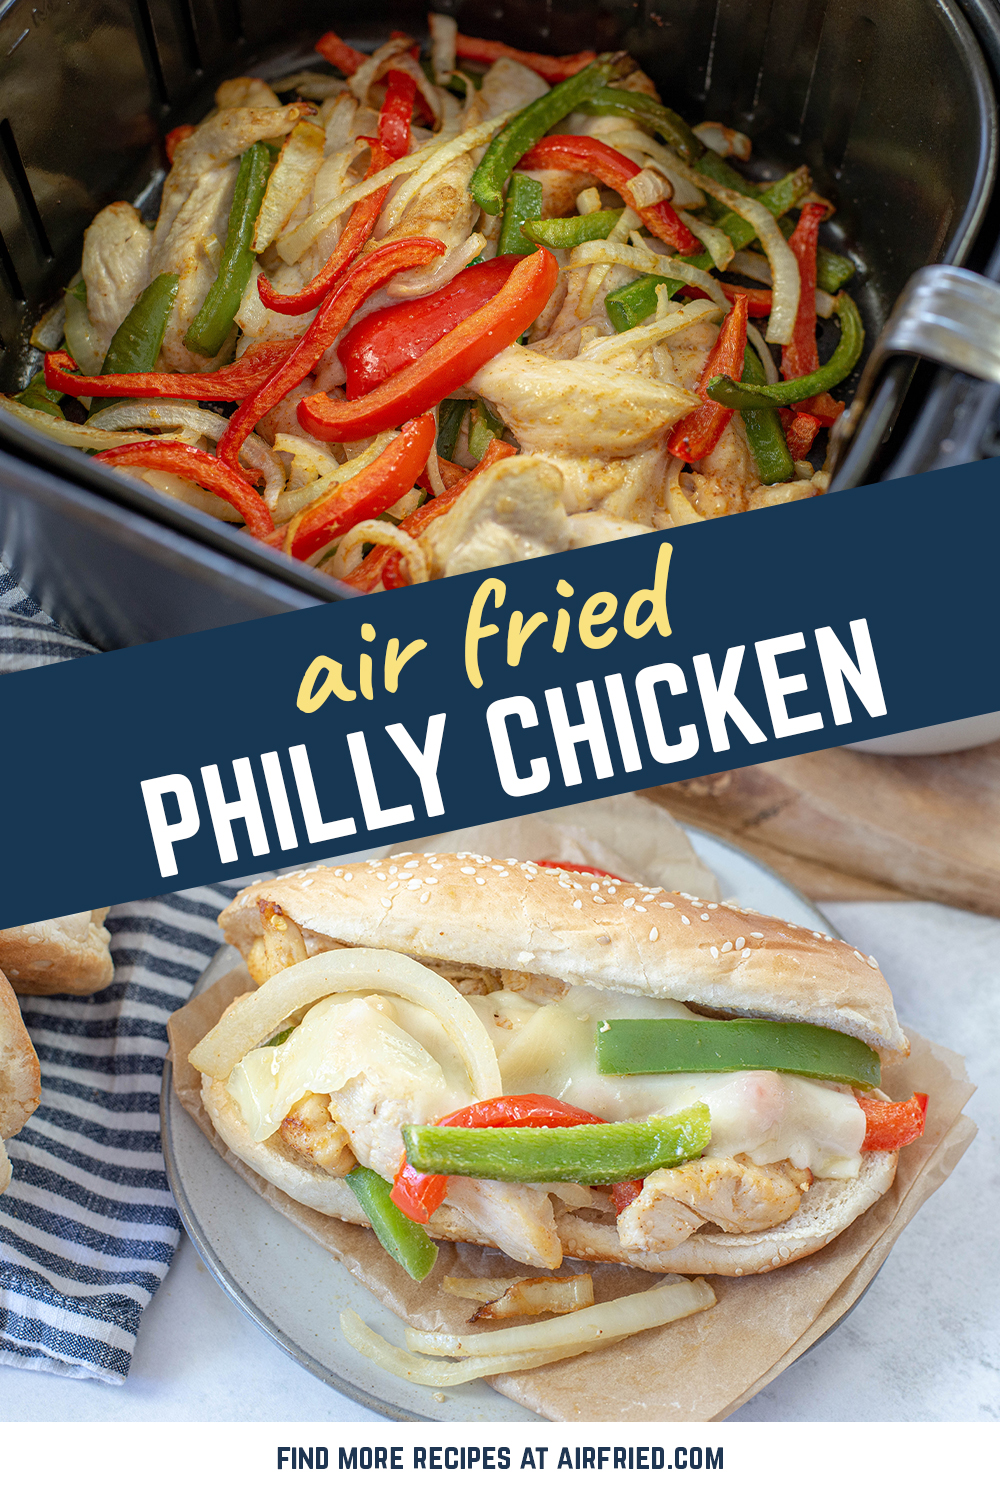 This Philly sandwich uses chicken instead of steak for a slight twist on an all time favorite sandwich!